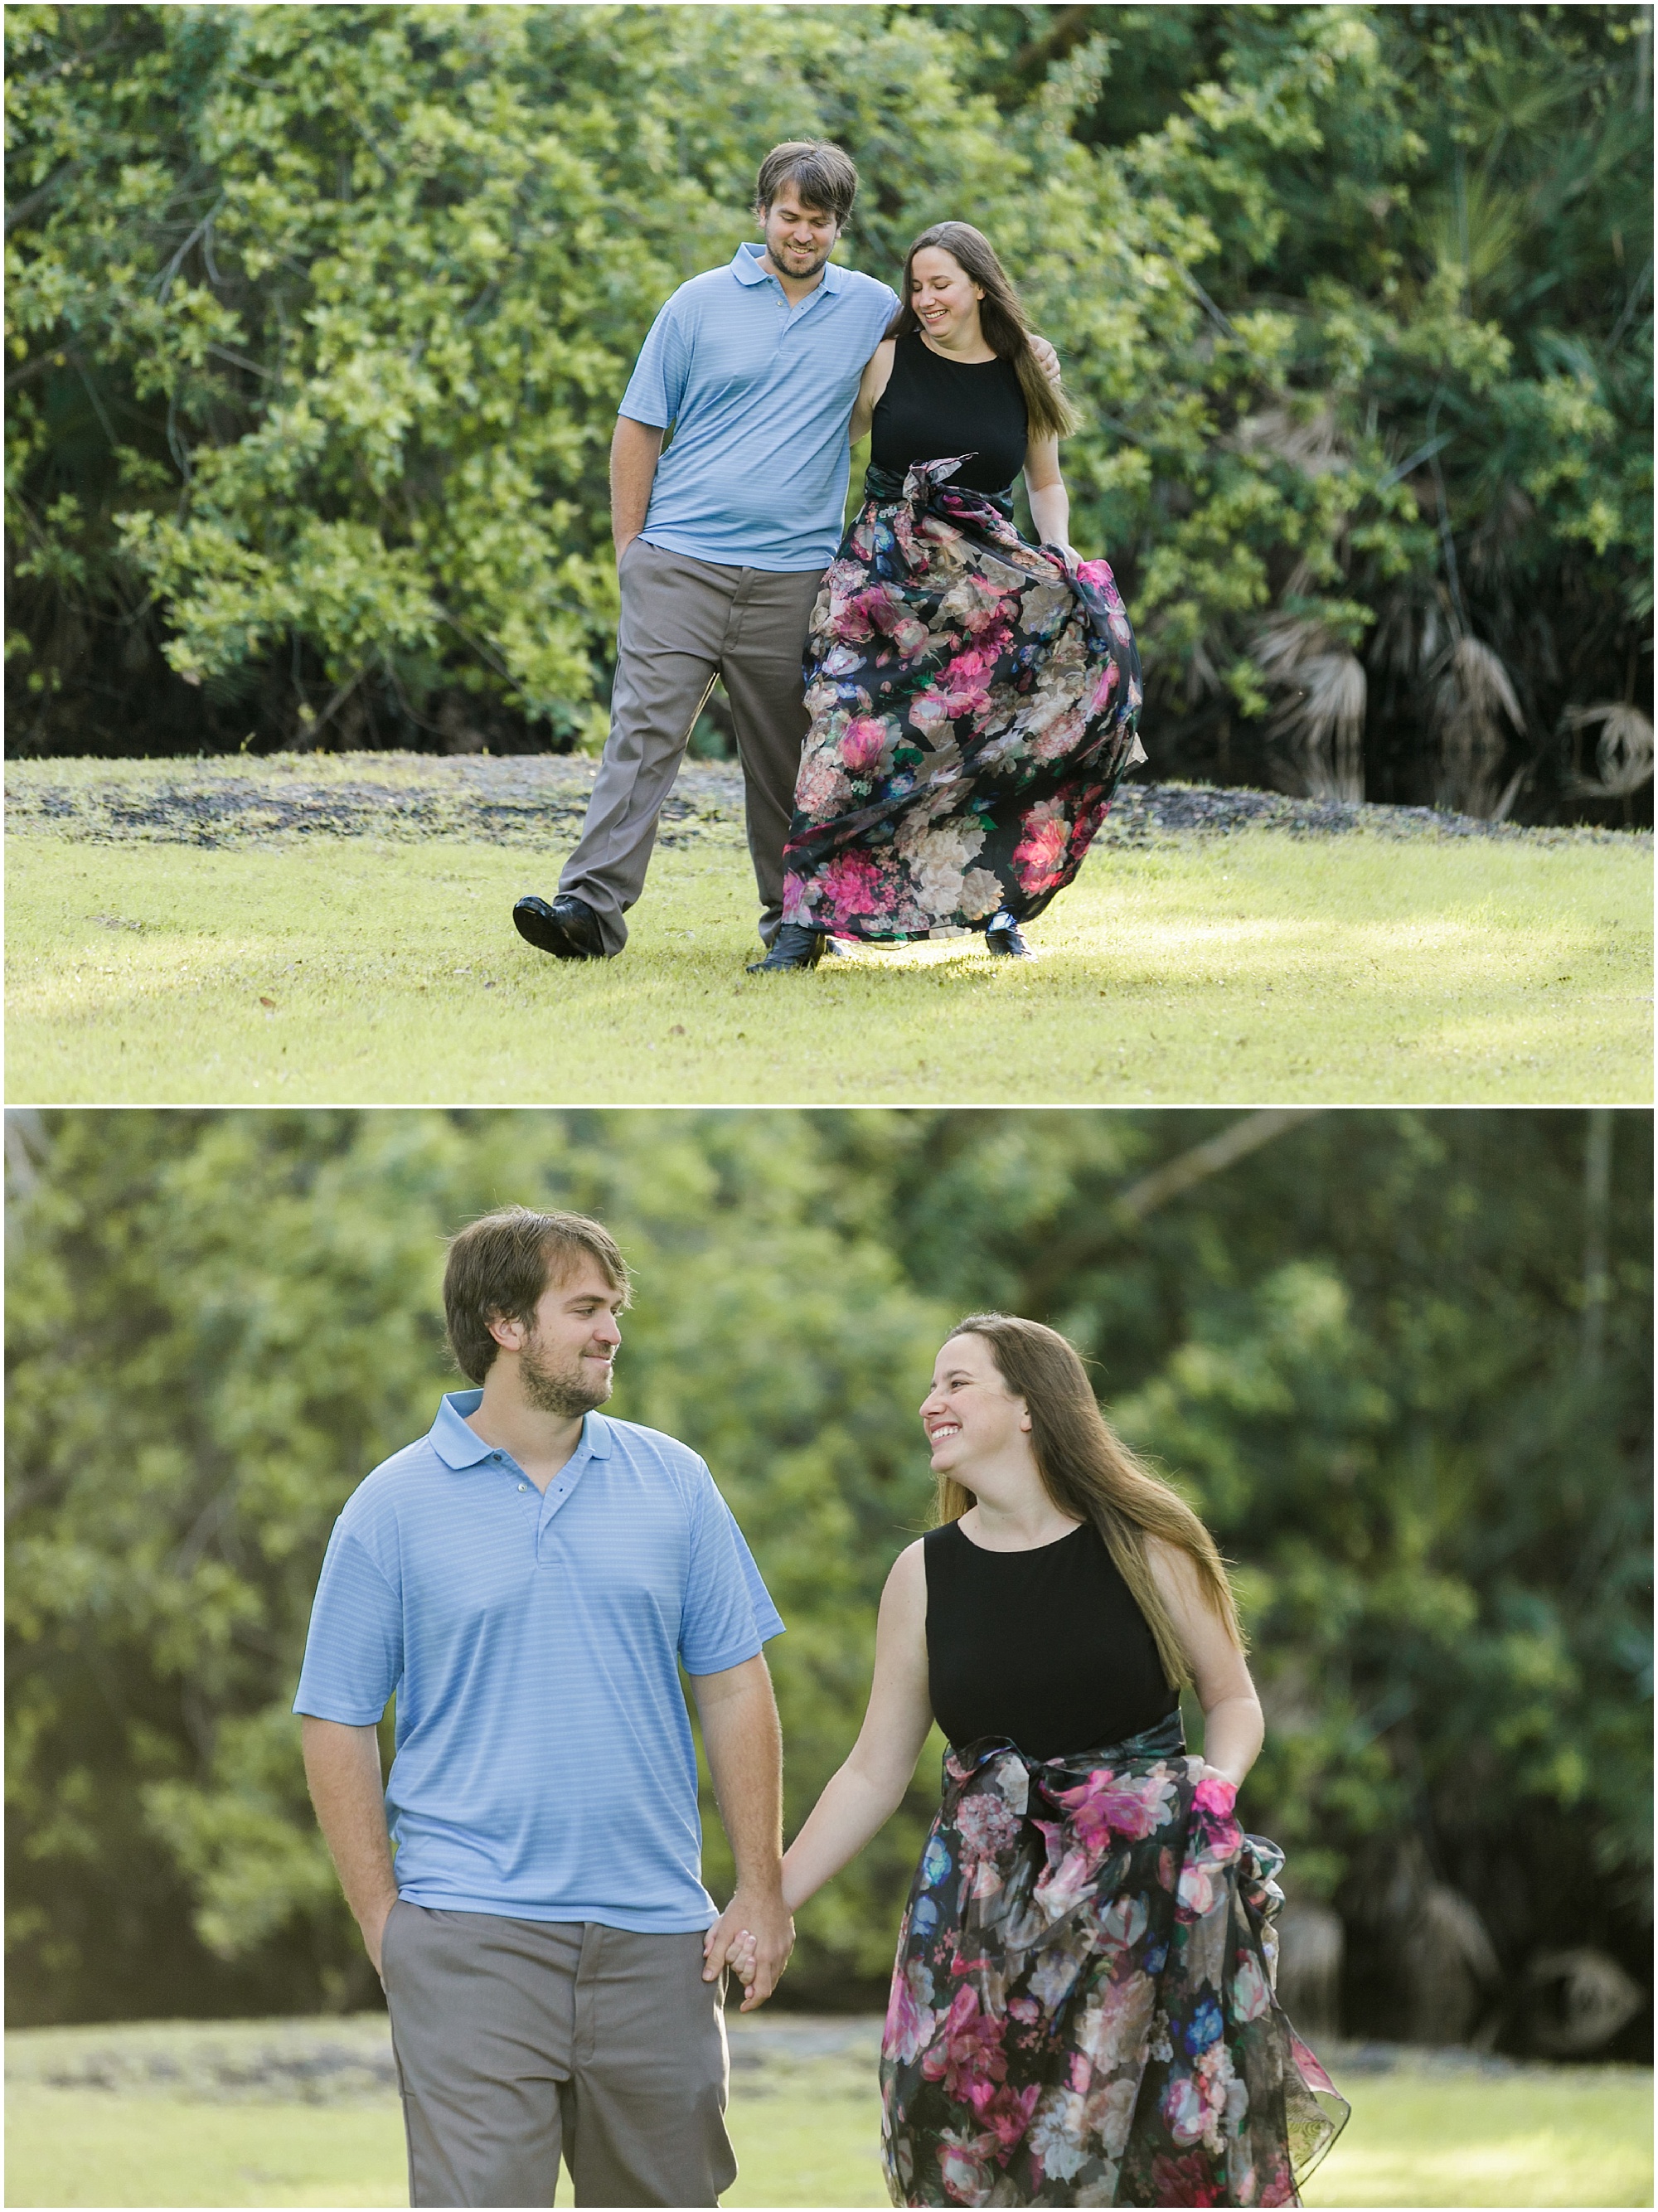 Couple laughing and joking while walking through the grass. 